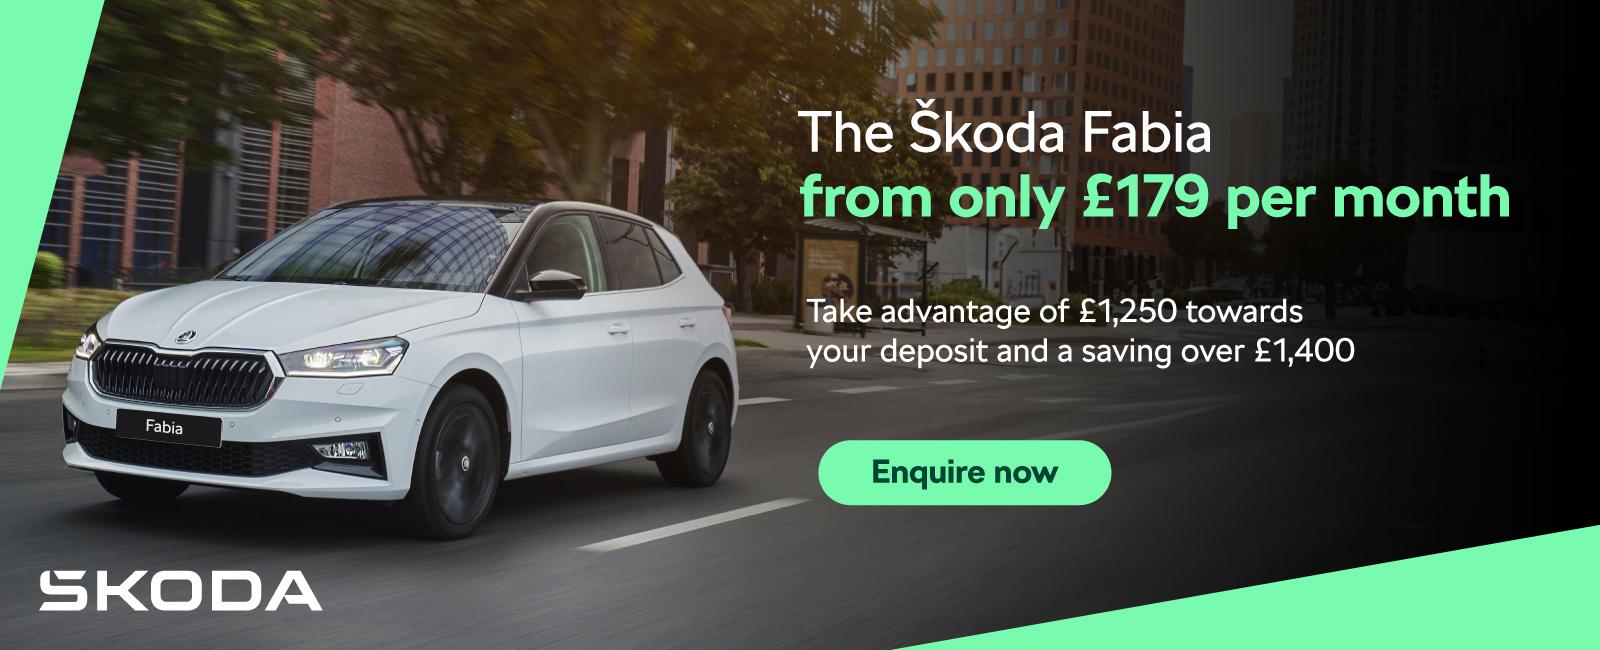 The Skoda Fabia from only £179 per month